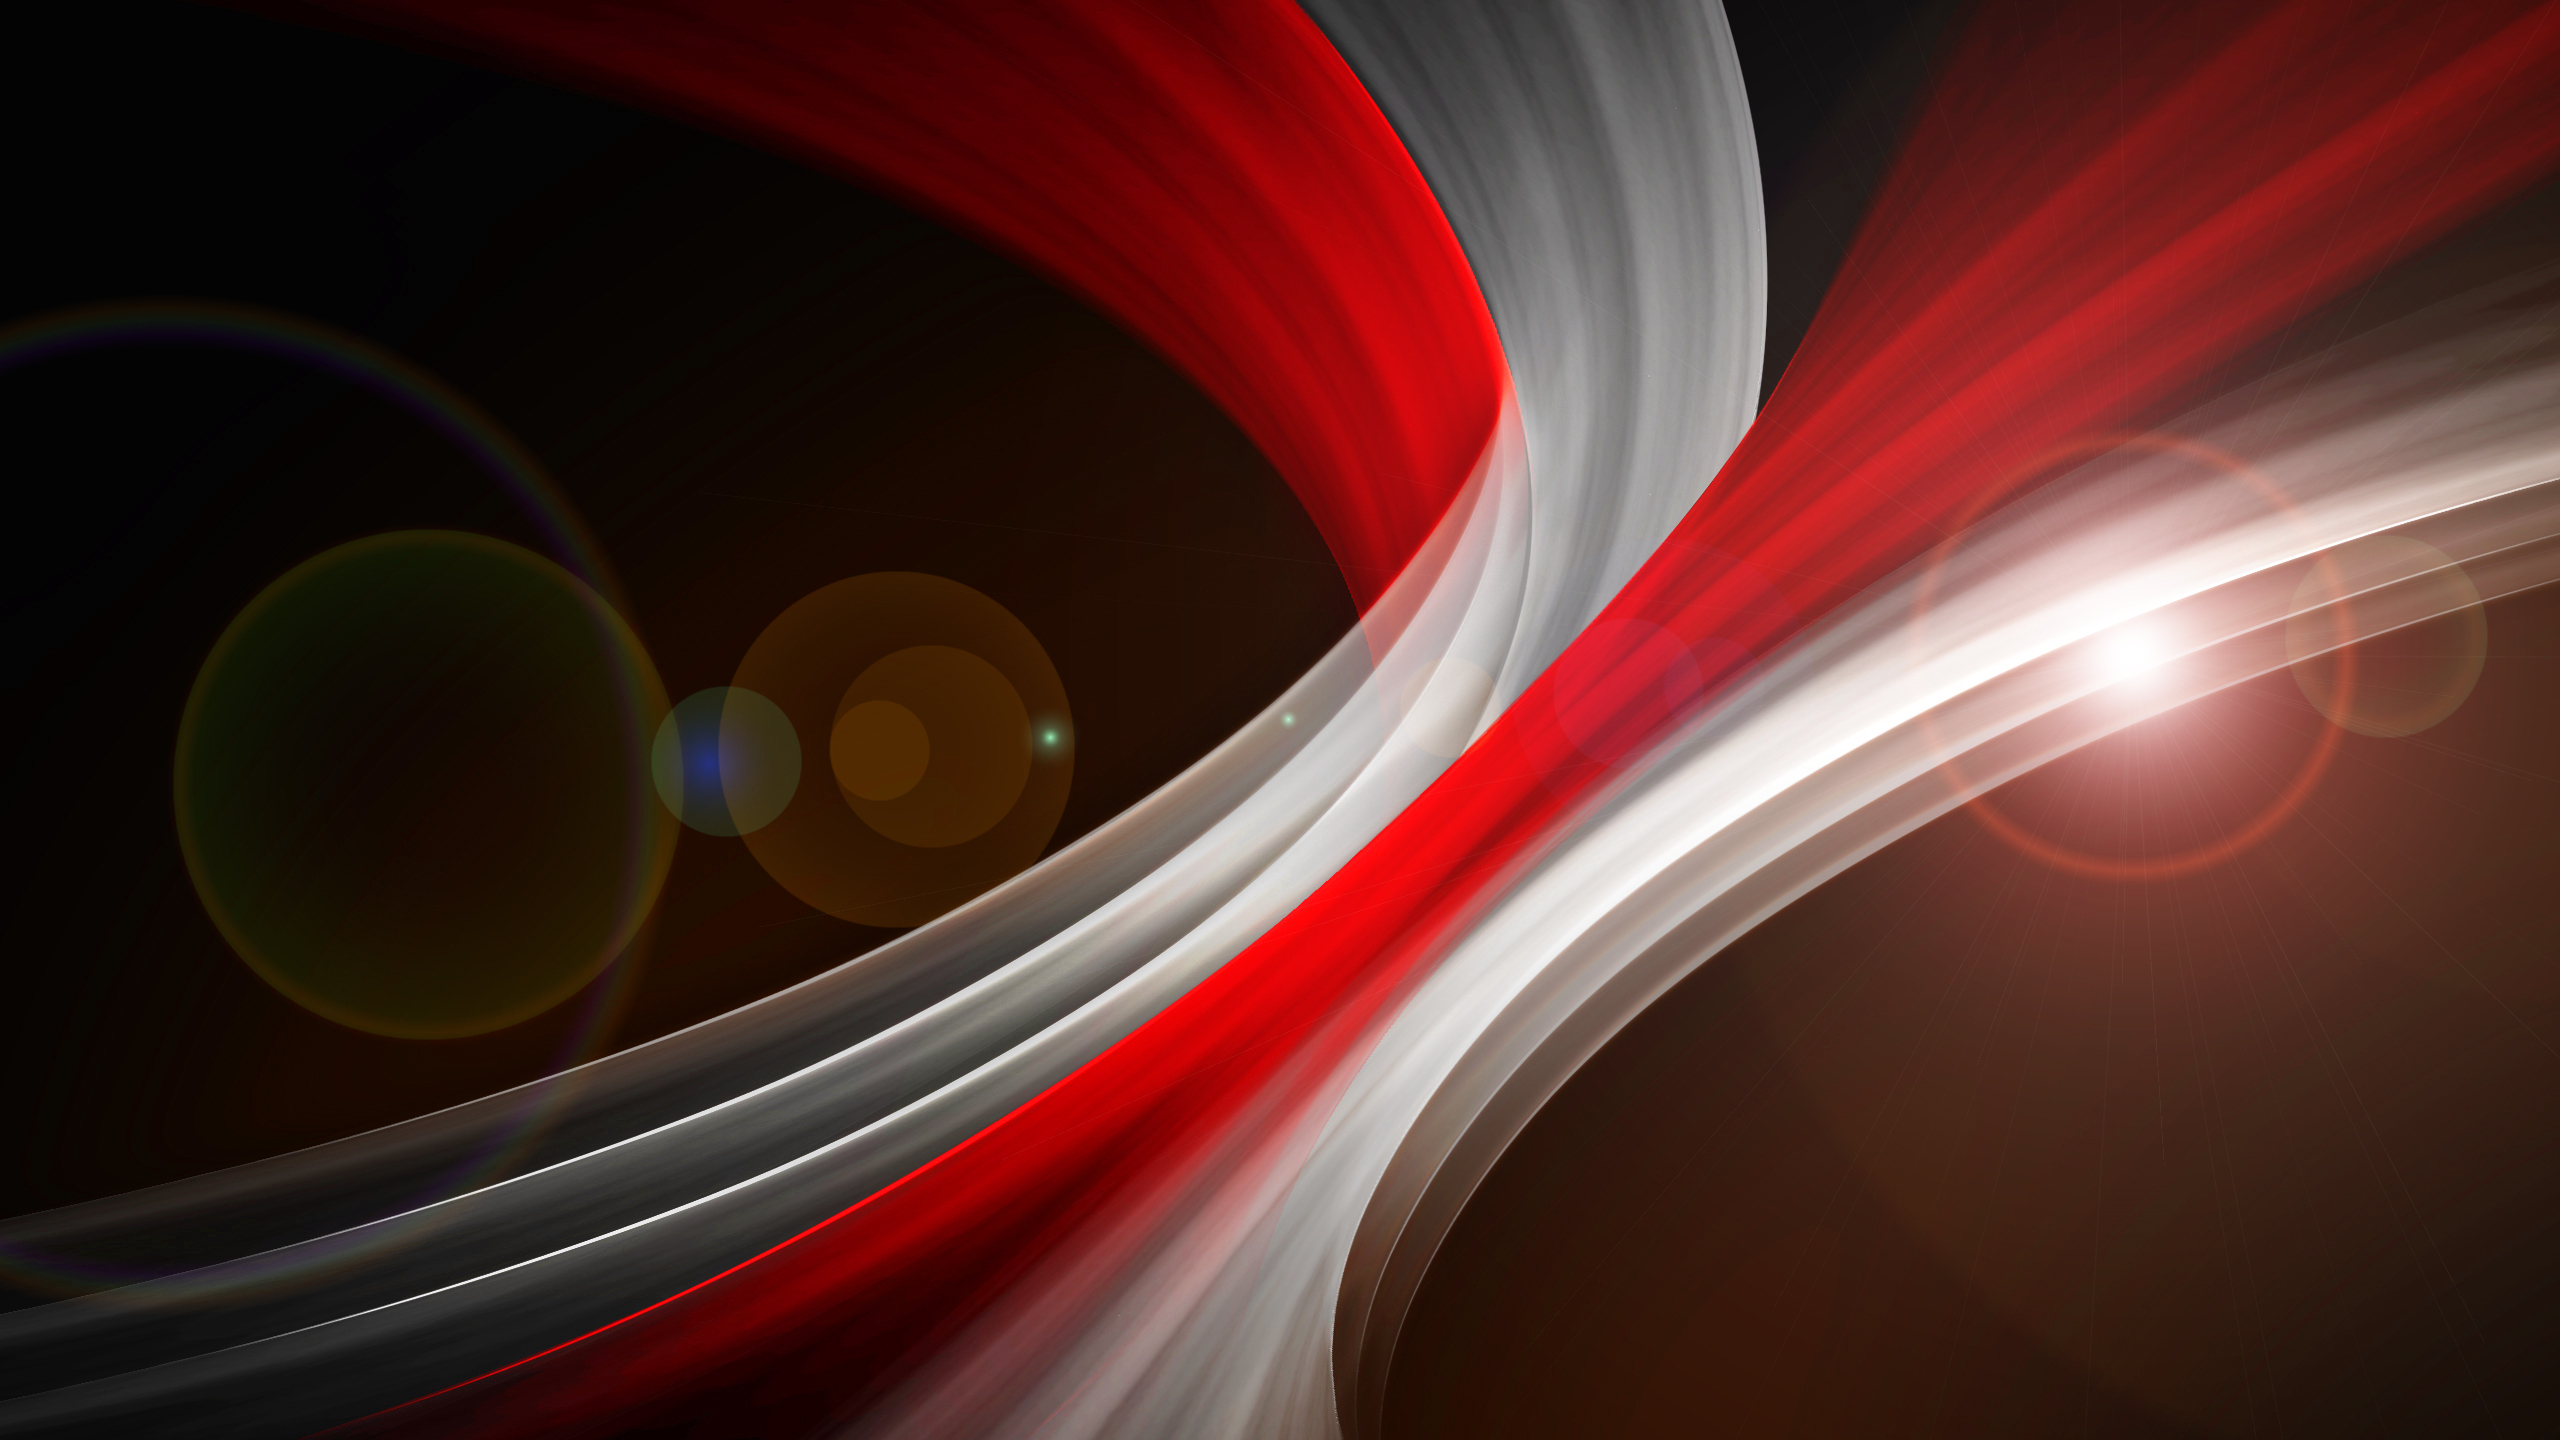 2560x1440 Red White Abstract Swirl 1440P Resolution HD 4k Wallpapers, Images, Backgrounds, Photos and Pictures